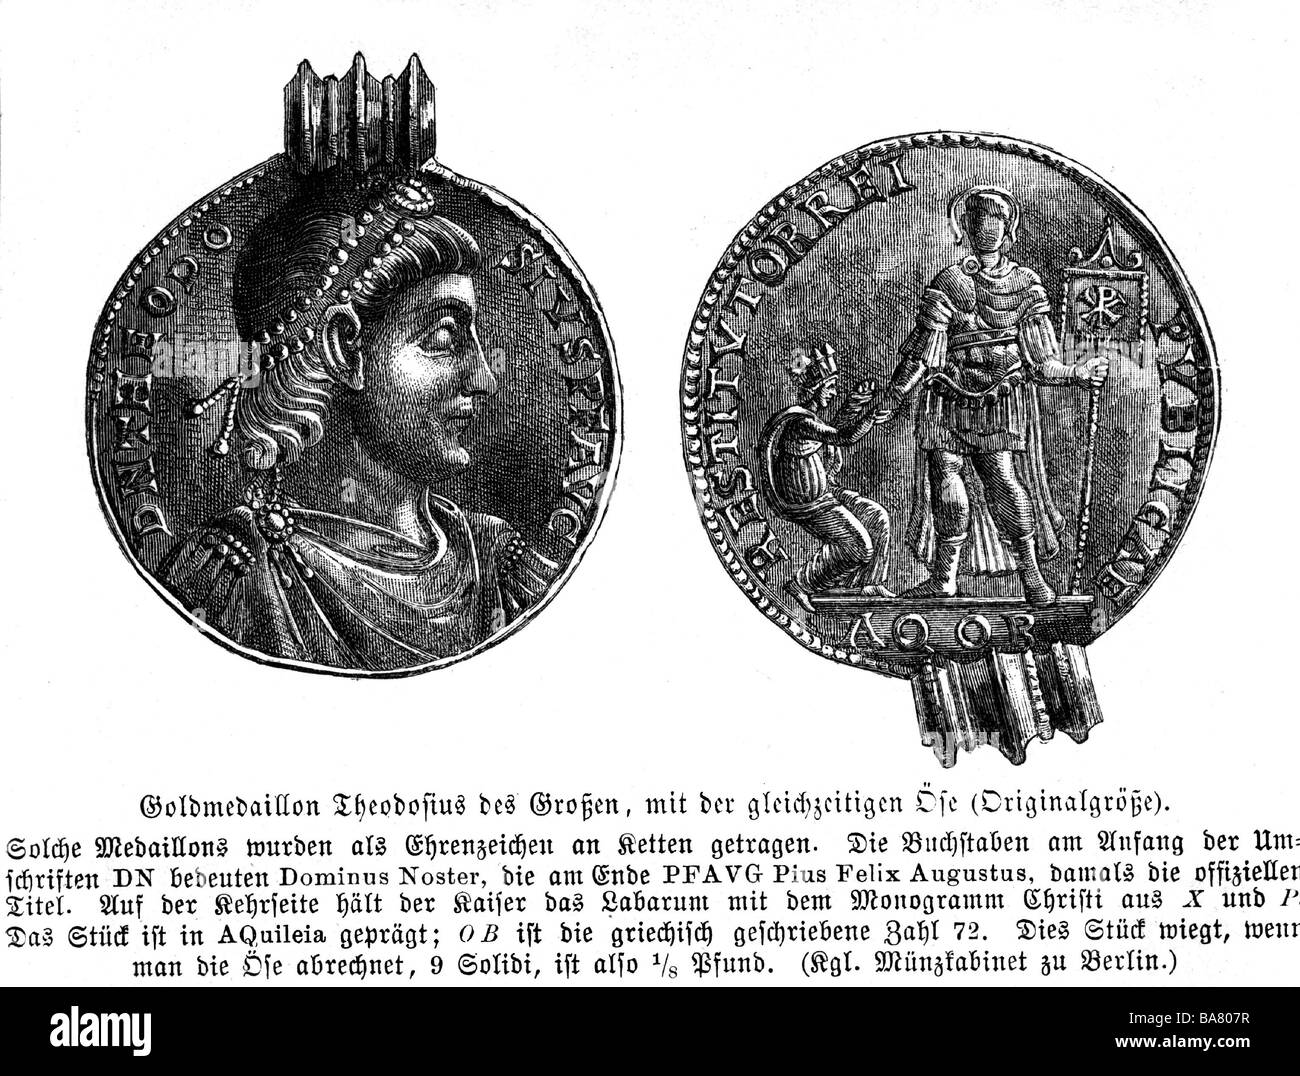 Theodosius I., Flavius, 'the Great', 11.1.347 - 17.1.395, Roman Emperor 19.1.379 - 17.1.395, coin, front: portrait, back: full length with labarum, wood engraving, 19th century, , Stock Photo